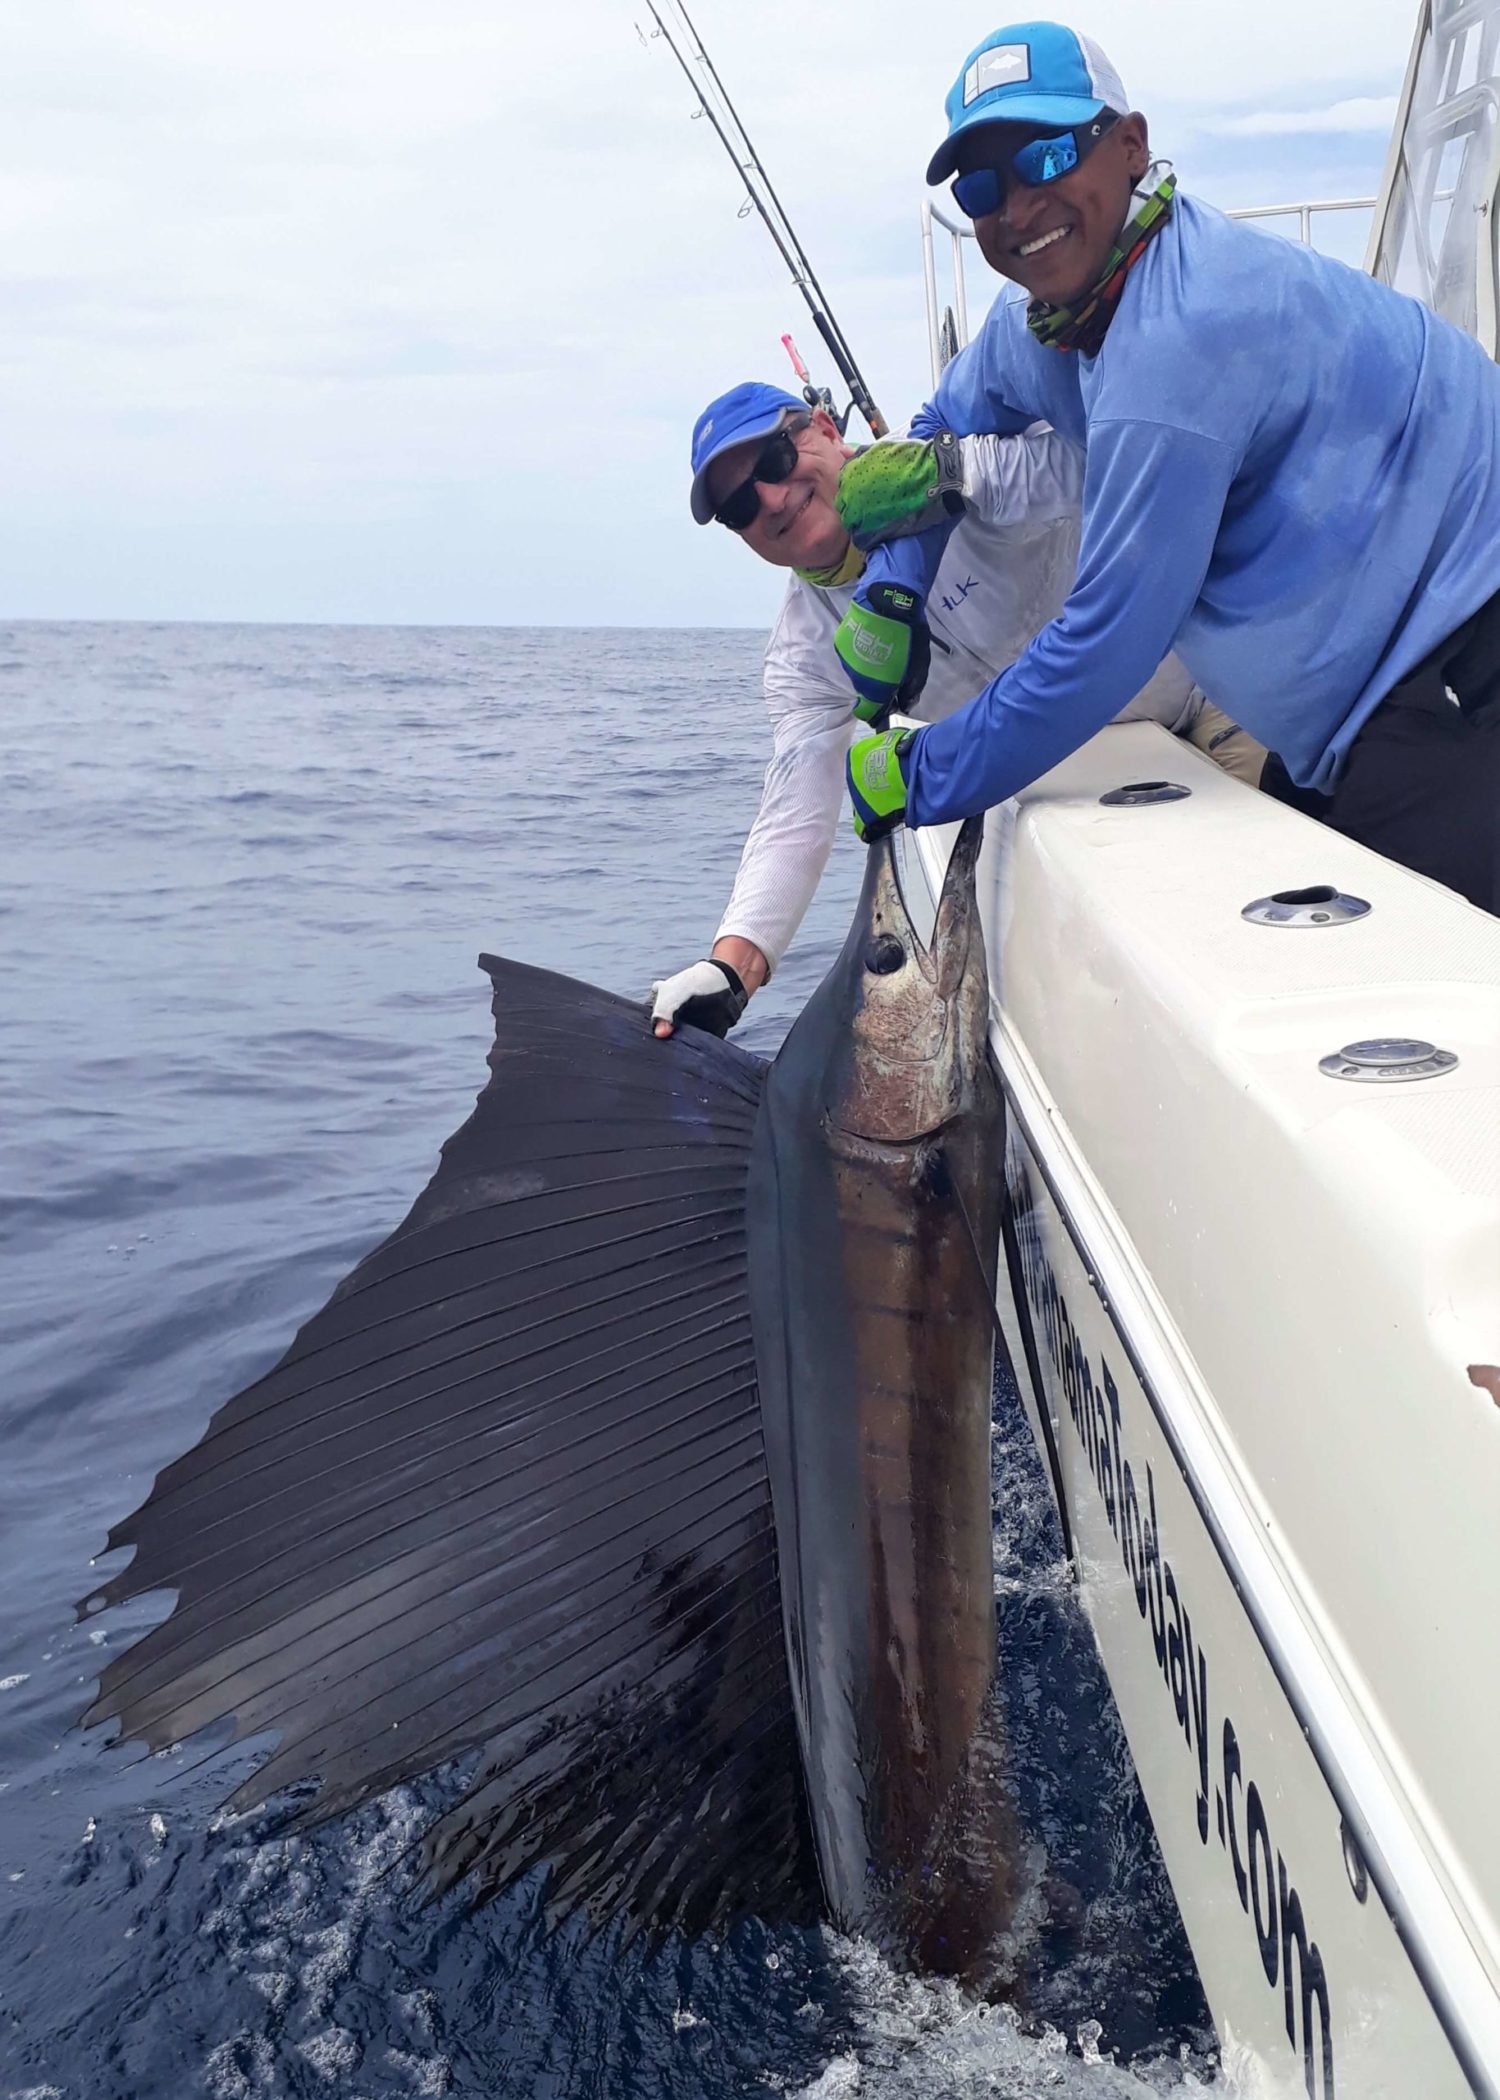 All About Sailfish Fishing and Catching a Sailfish in Panama